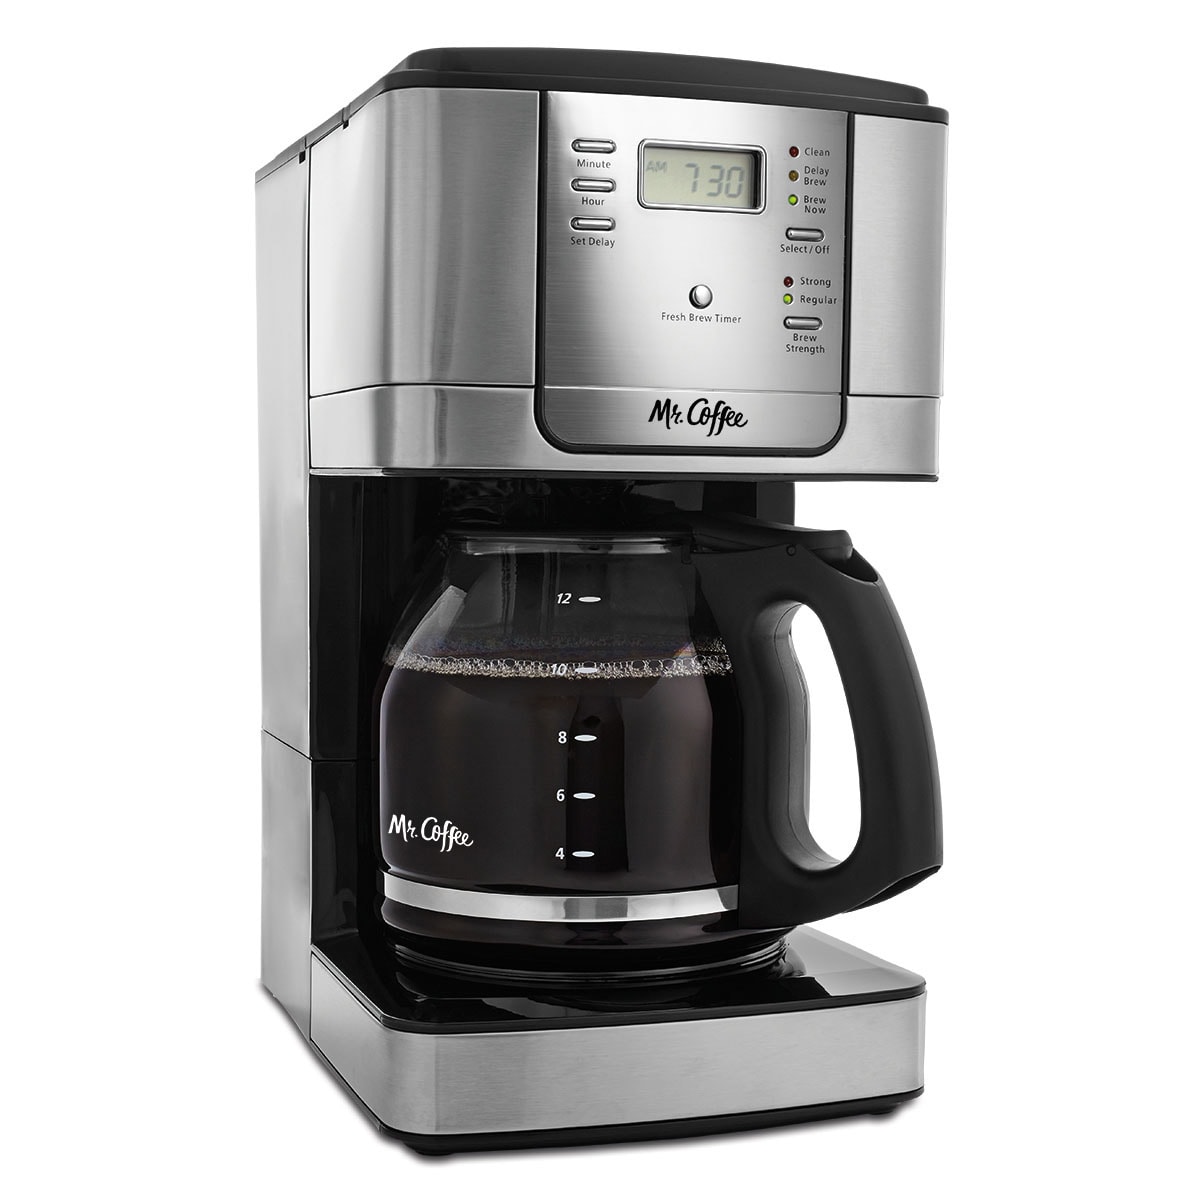 https://ak1.ostkcdn.com/images/products/12010867/MR-COFFEE-ADVNCD-BREW-5CUP-APPLPRGRM-CFFEE-MKR-W-SS-CARAFE-BLK-CHR-446cbcc1-243e-4157-bcd3-e447926f6ae5.jpg